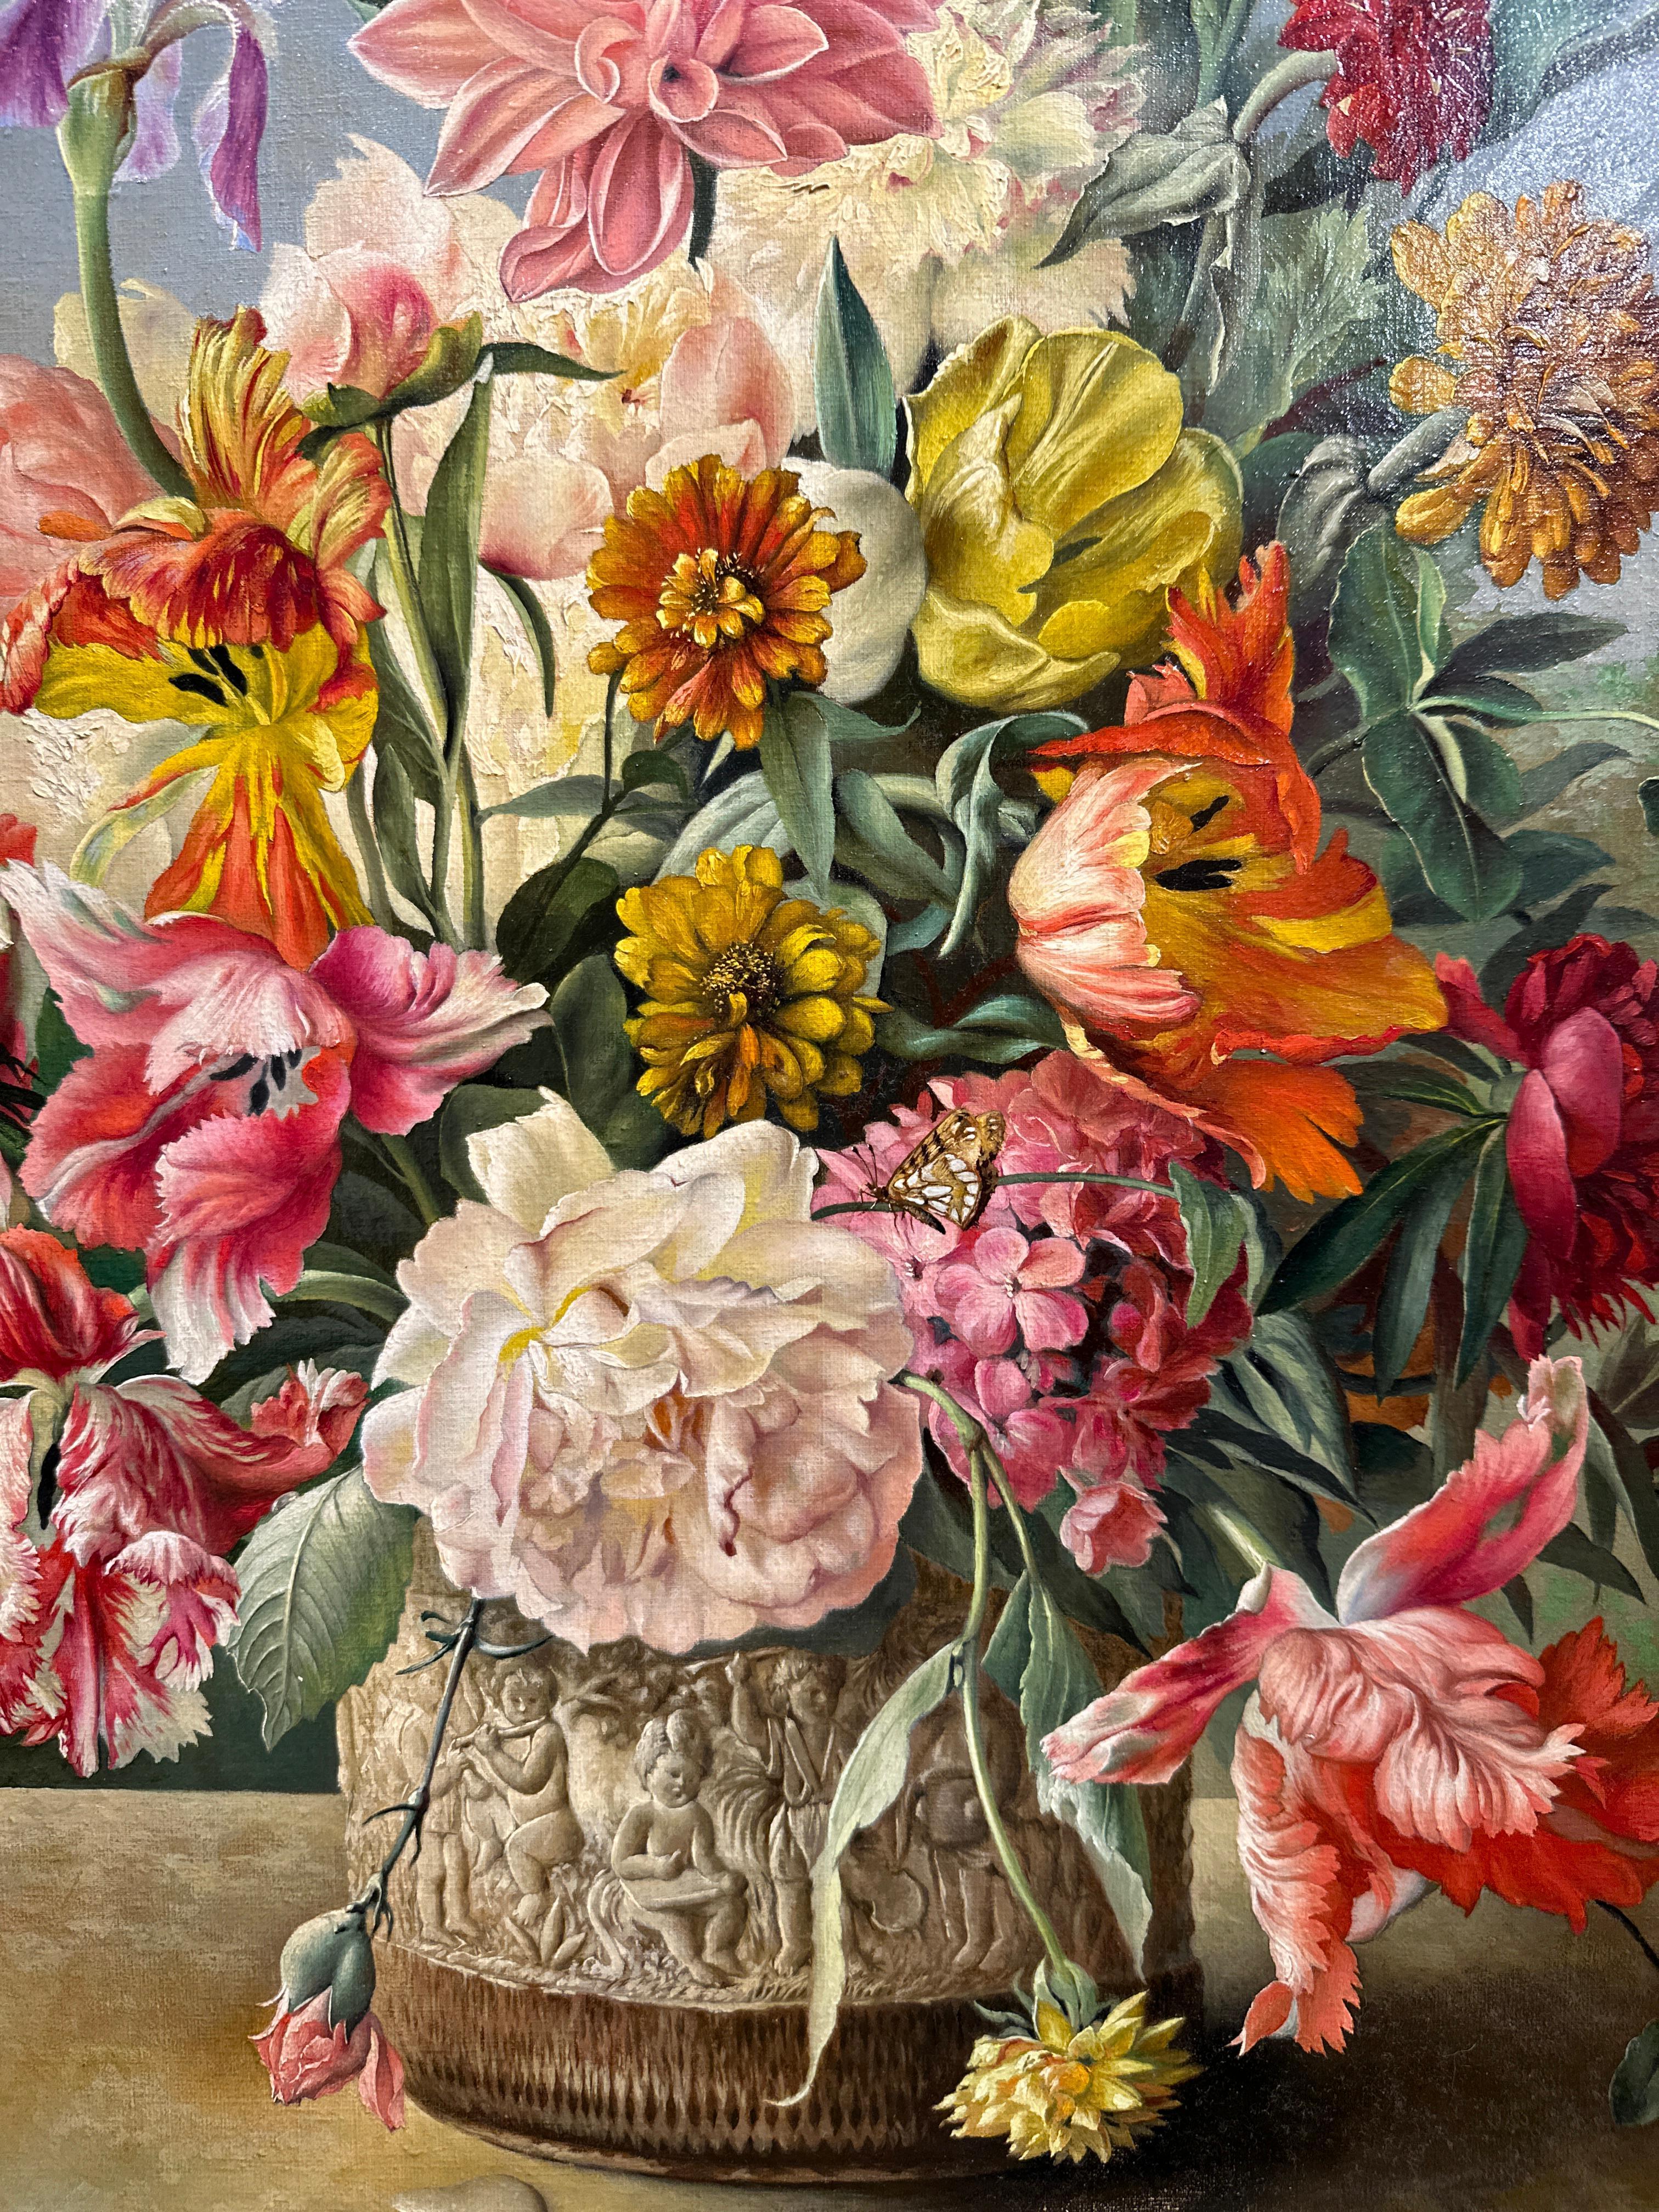 Floral Still Life in Cameo Pot
Franz Leitgeb (Austrian, 1911-1997)
Signed Lower Right
33 x 27 inches
40.5 x 34.5 inches

